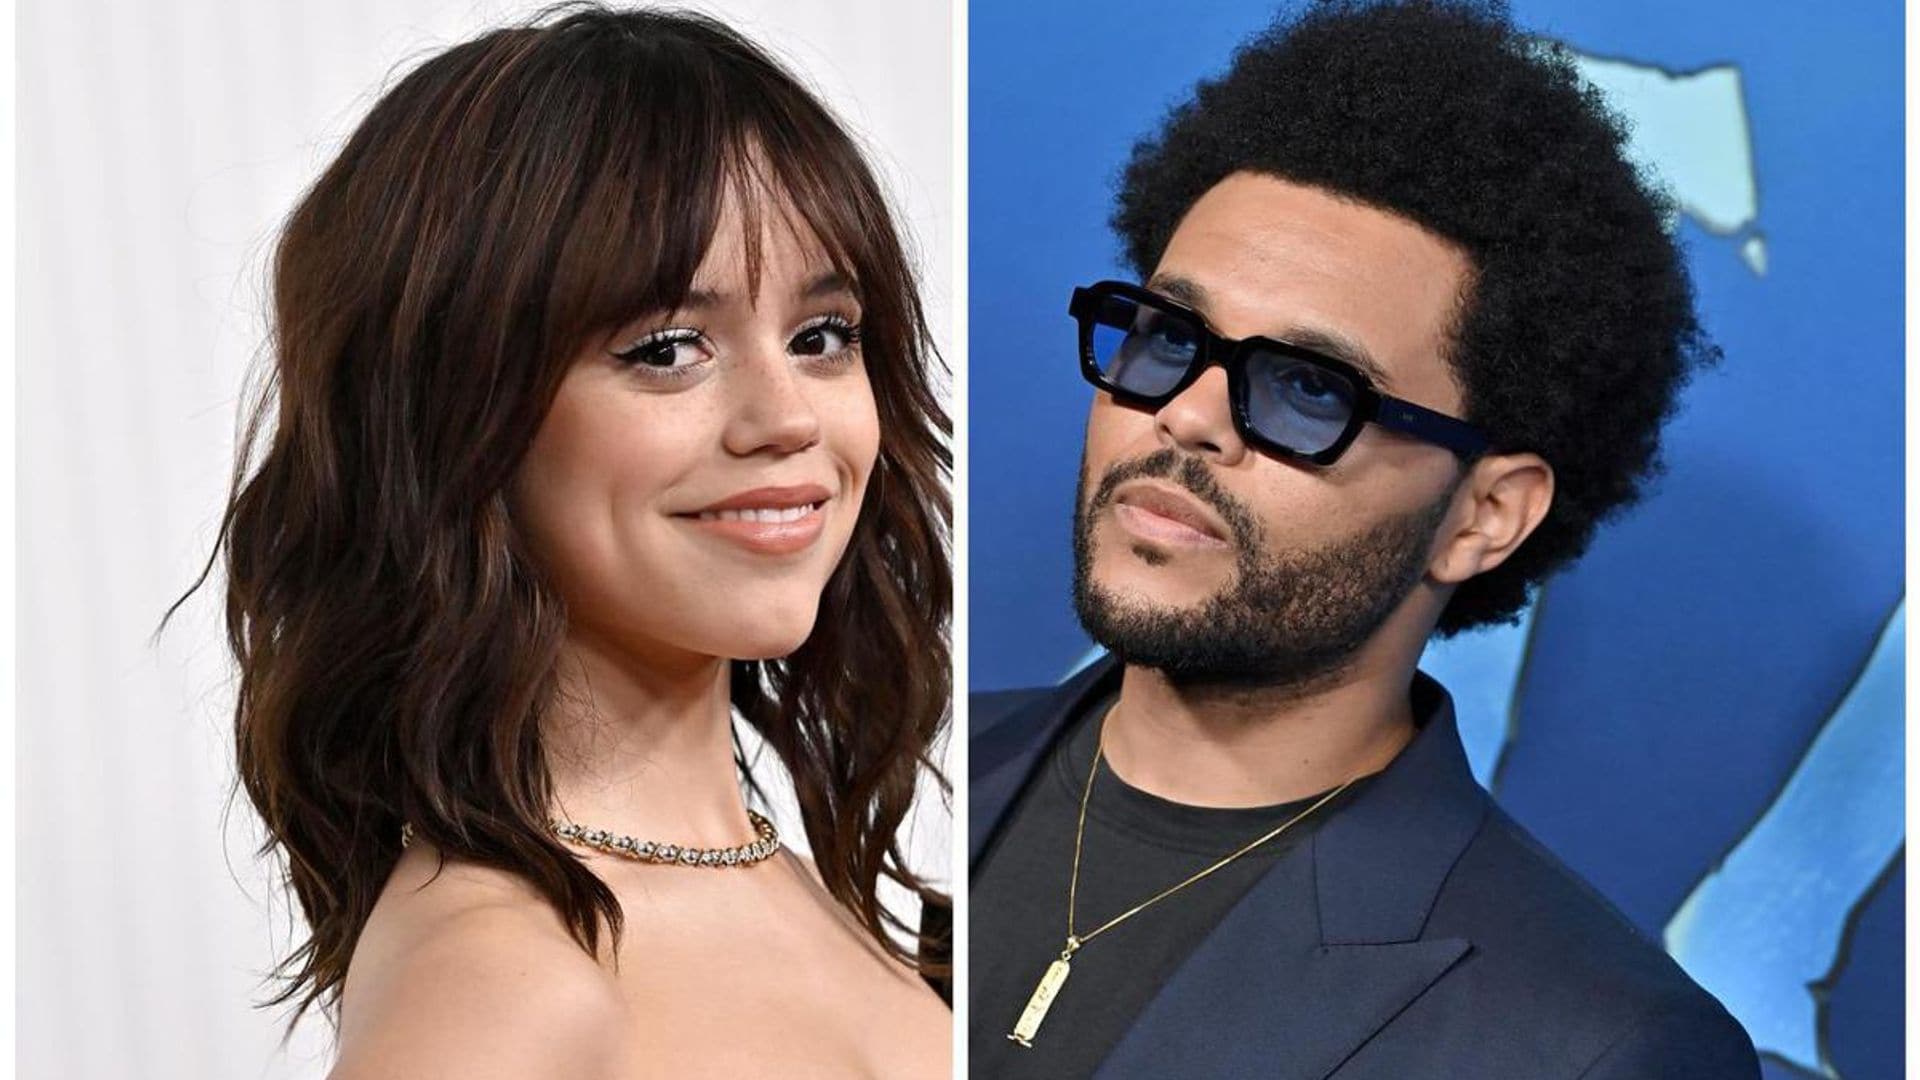 Jenna Ortega and The Weeknd set to star in new film: Here’s everything we know